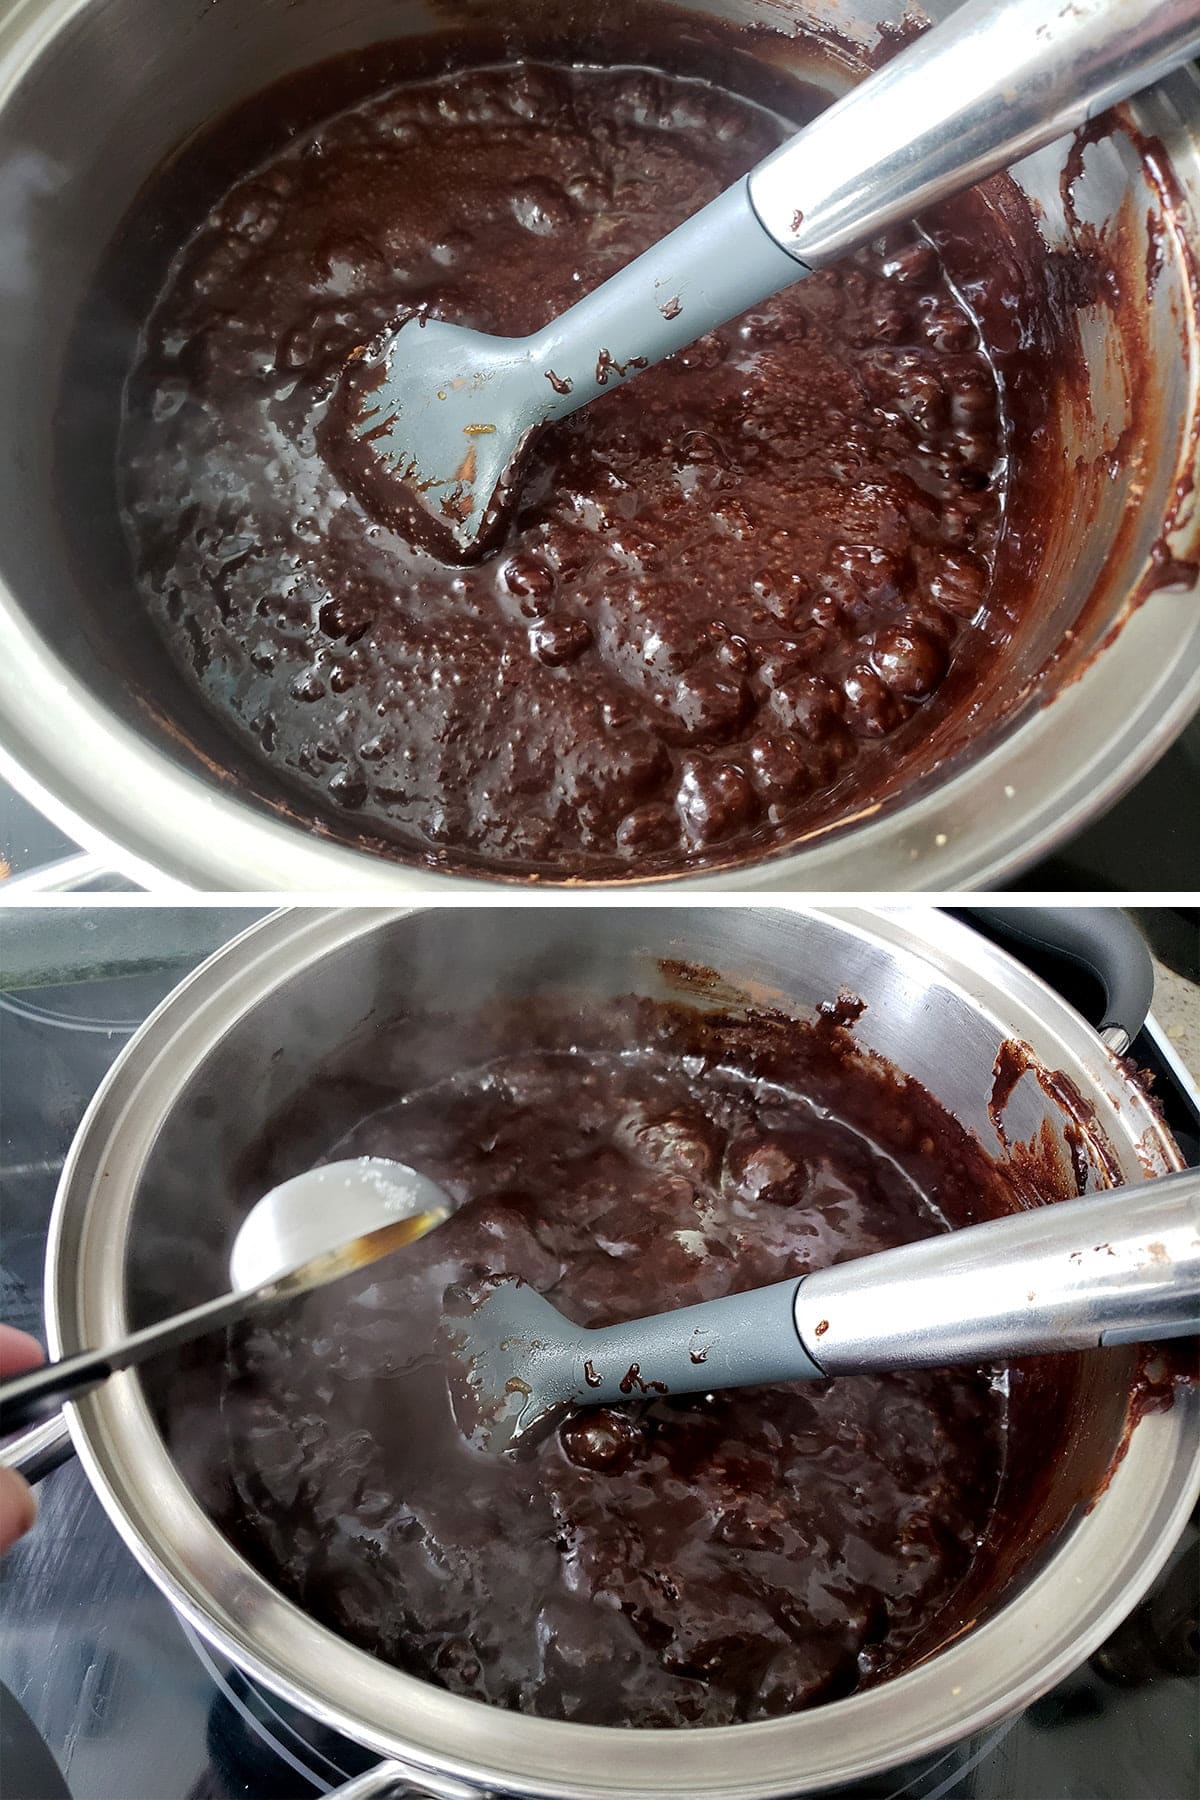 A two part compilation image showing the chocolate caramel being boiled, and the vanilla being added.